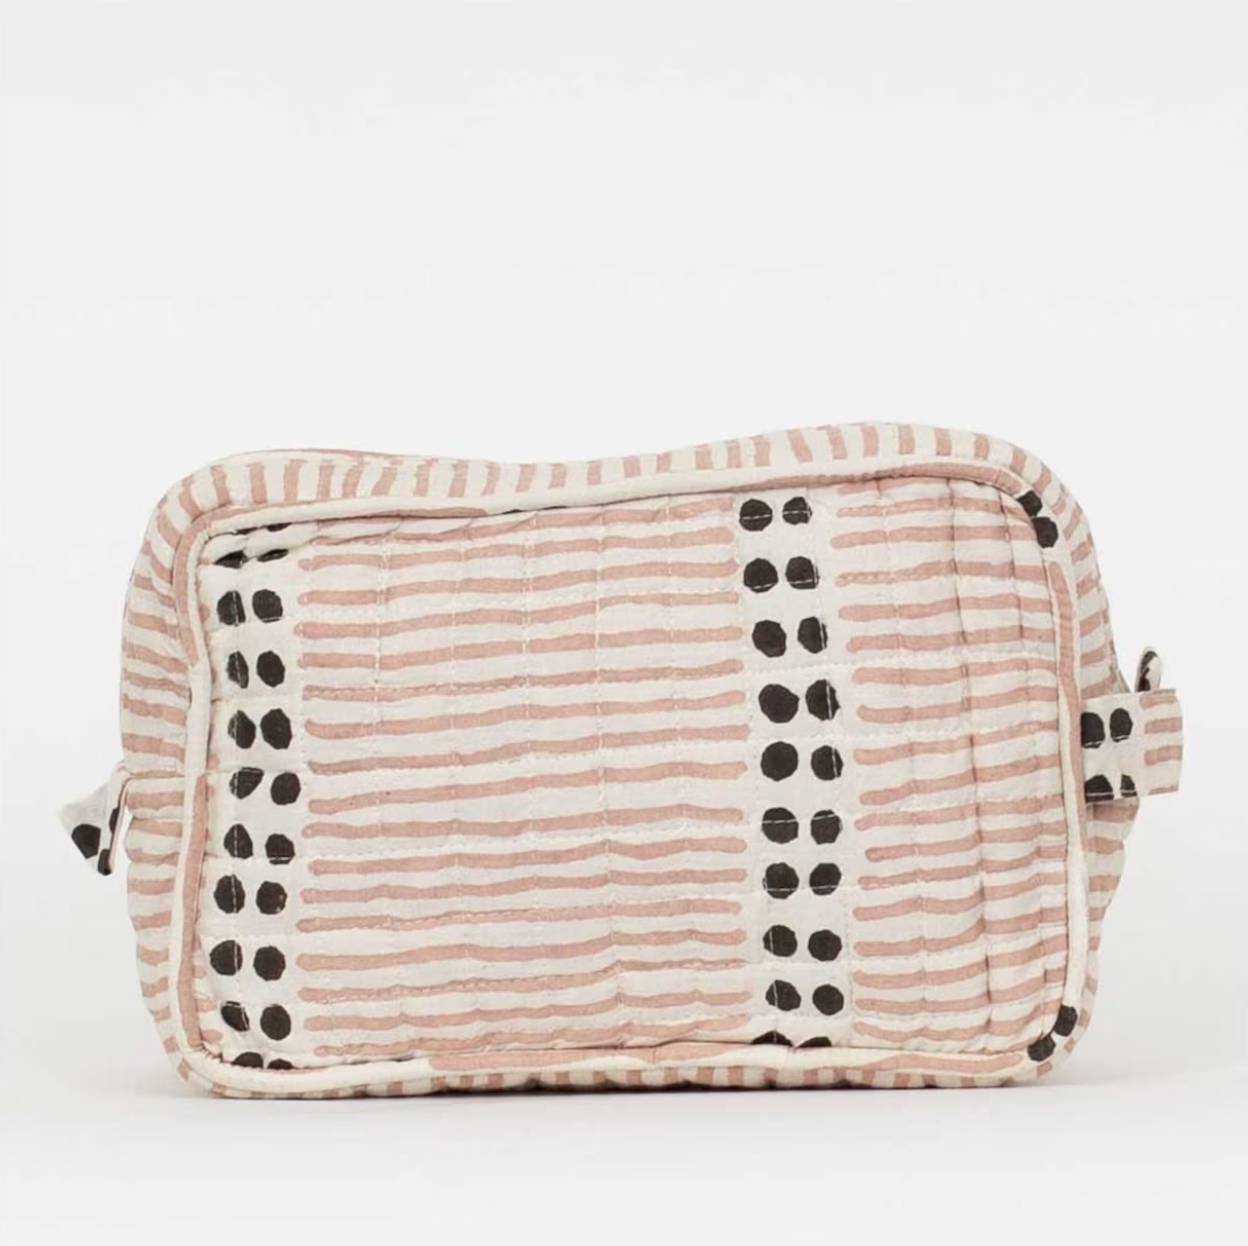 Toiletry Bag Dotline, in pink / brown / off white, made in cotton 23cm